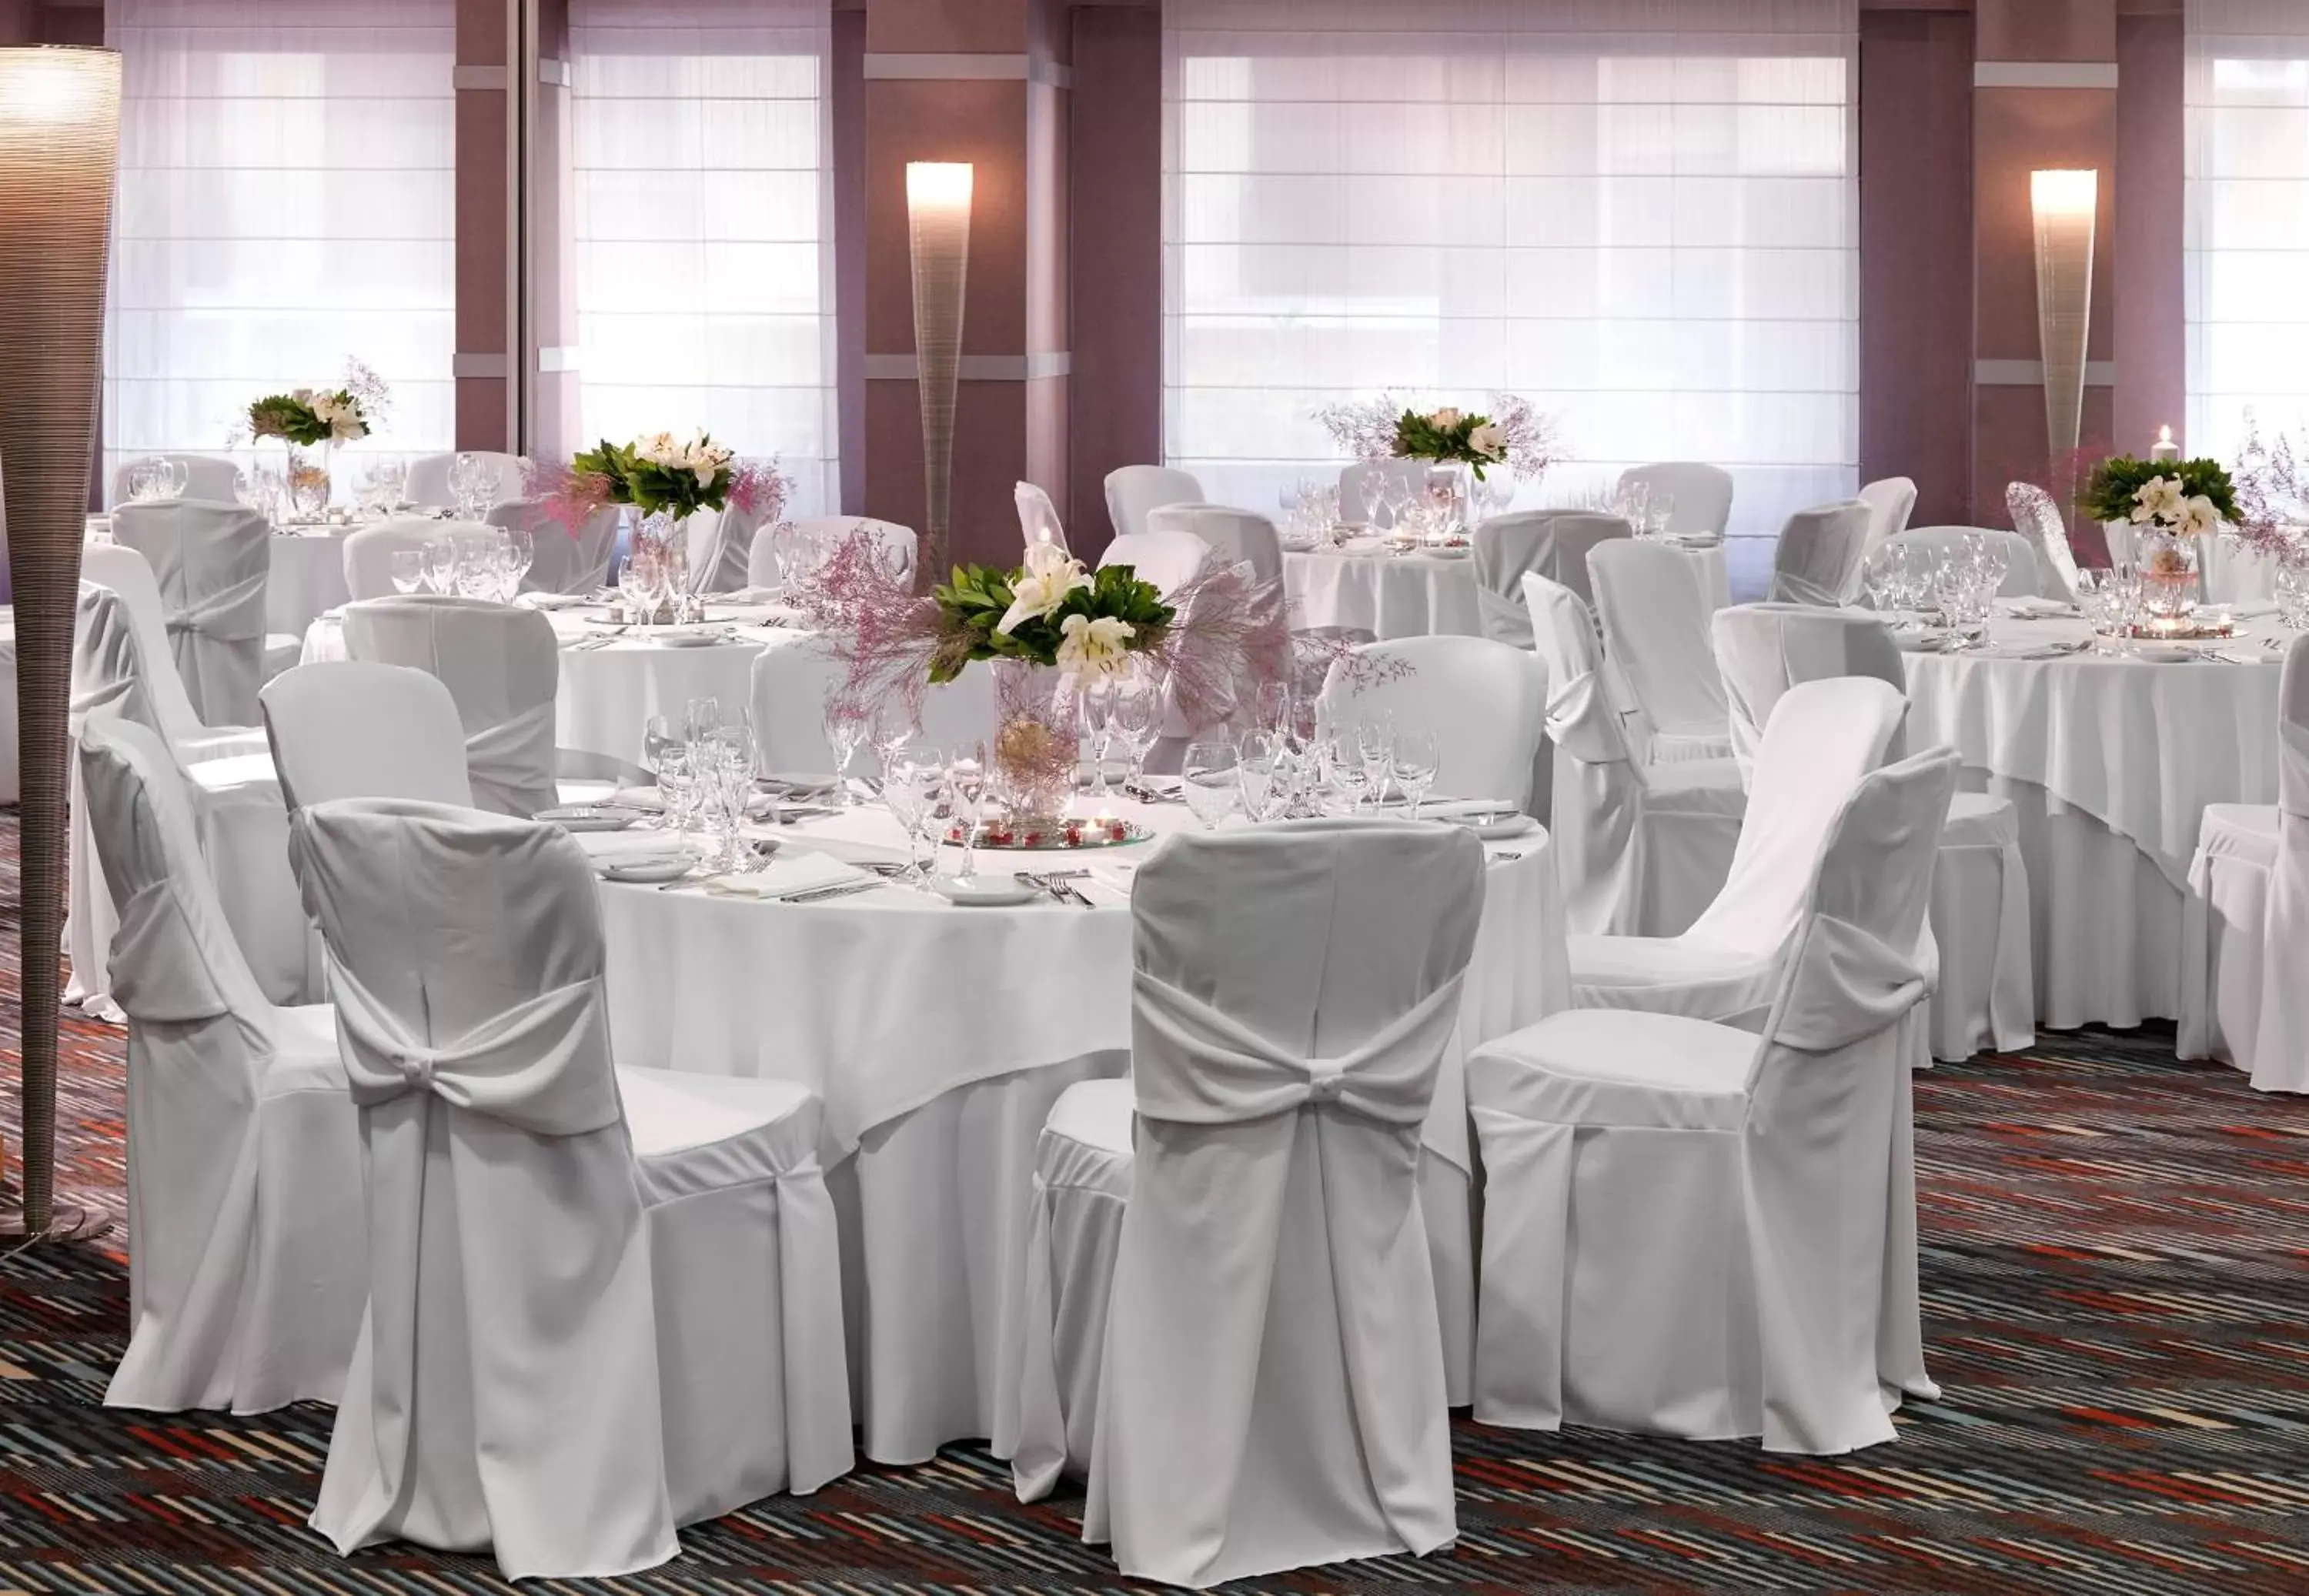 Banquet/Function facilities, Banquet Facilities in Crowne Plaza Athens City Centre, an IHG Hotel